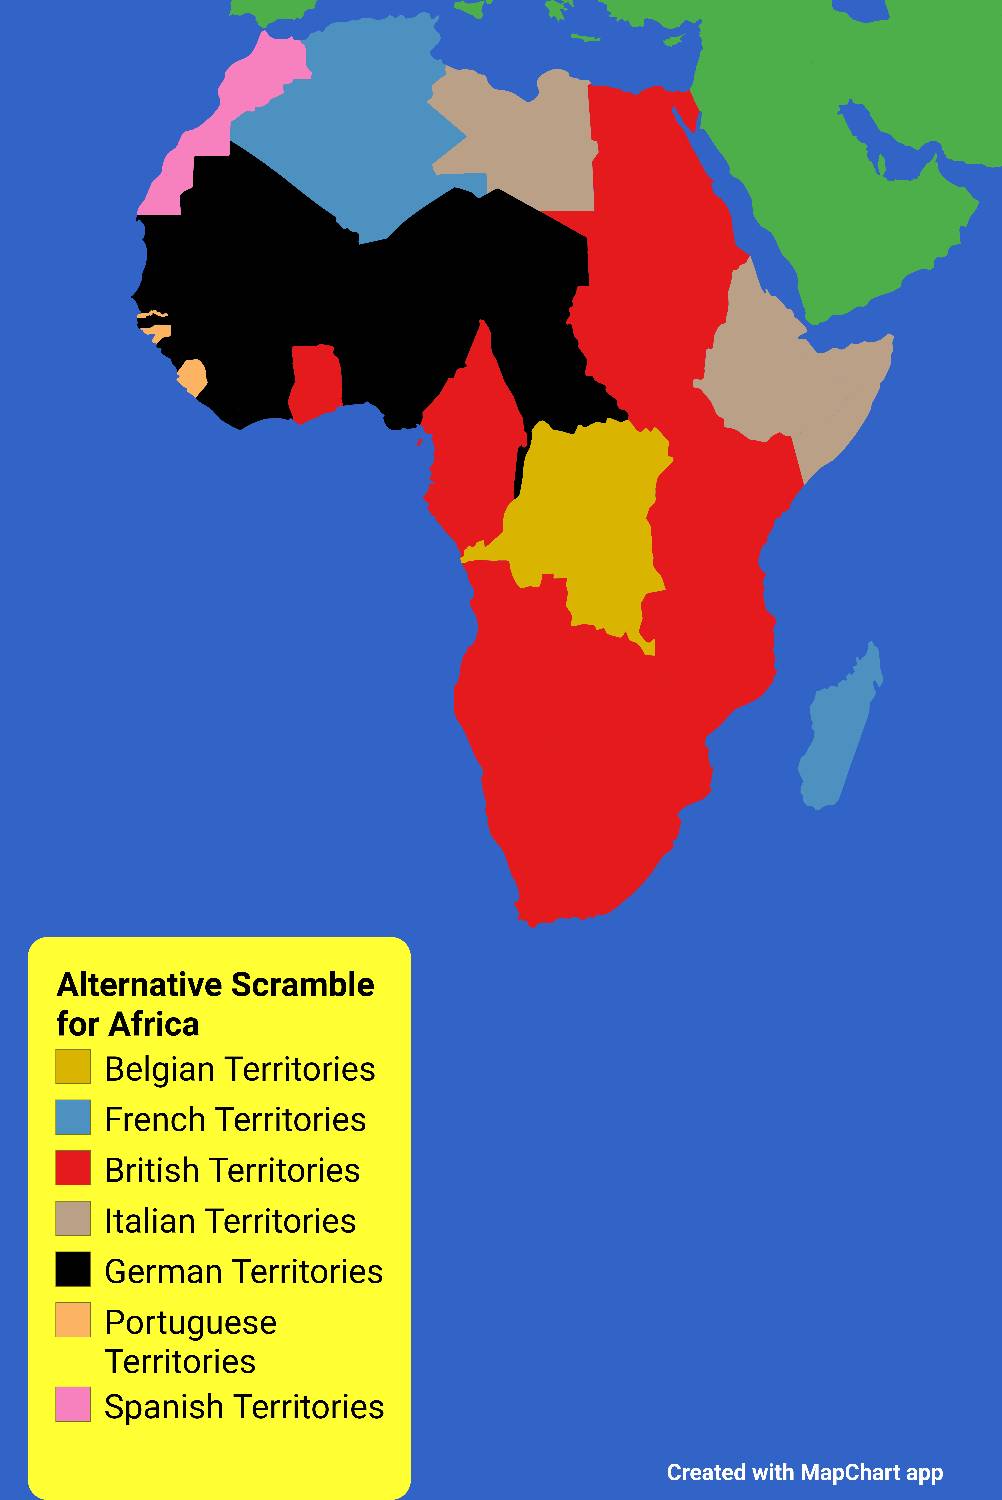 scramble for africa